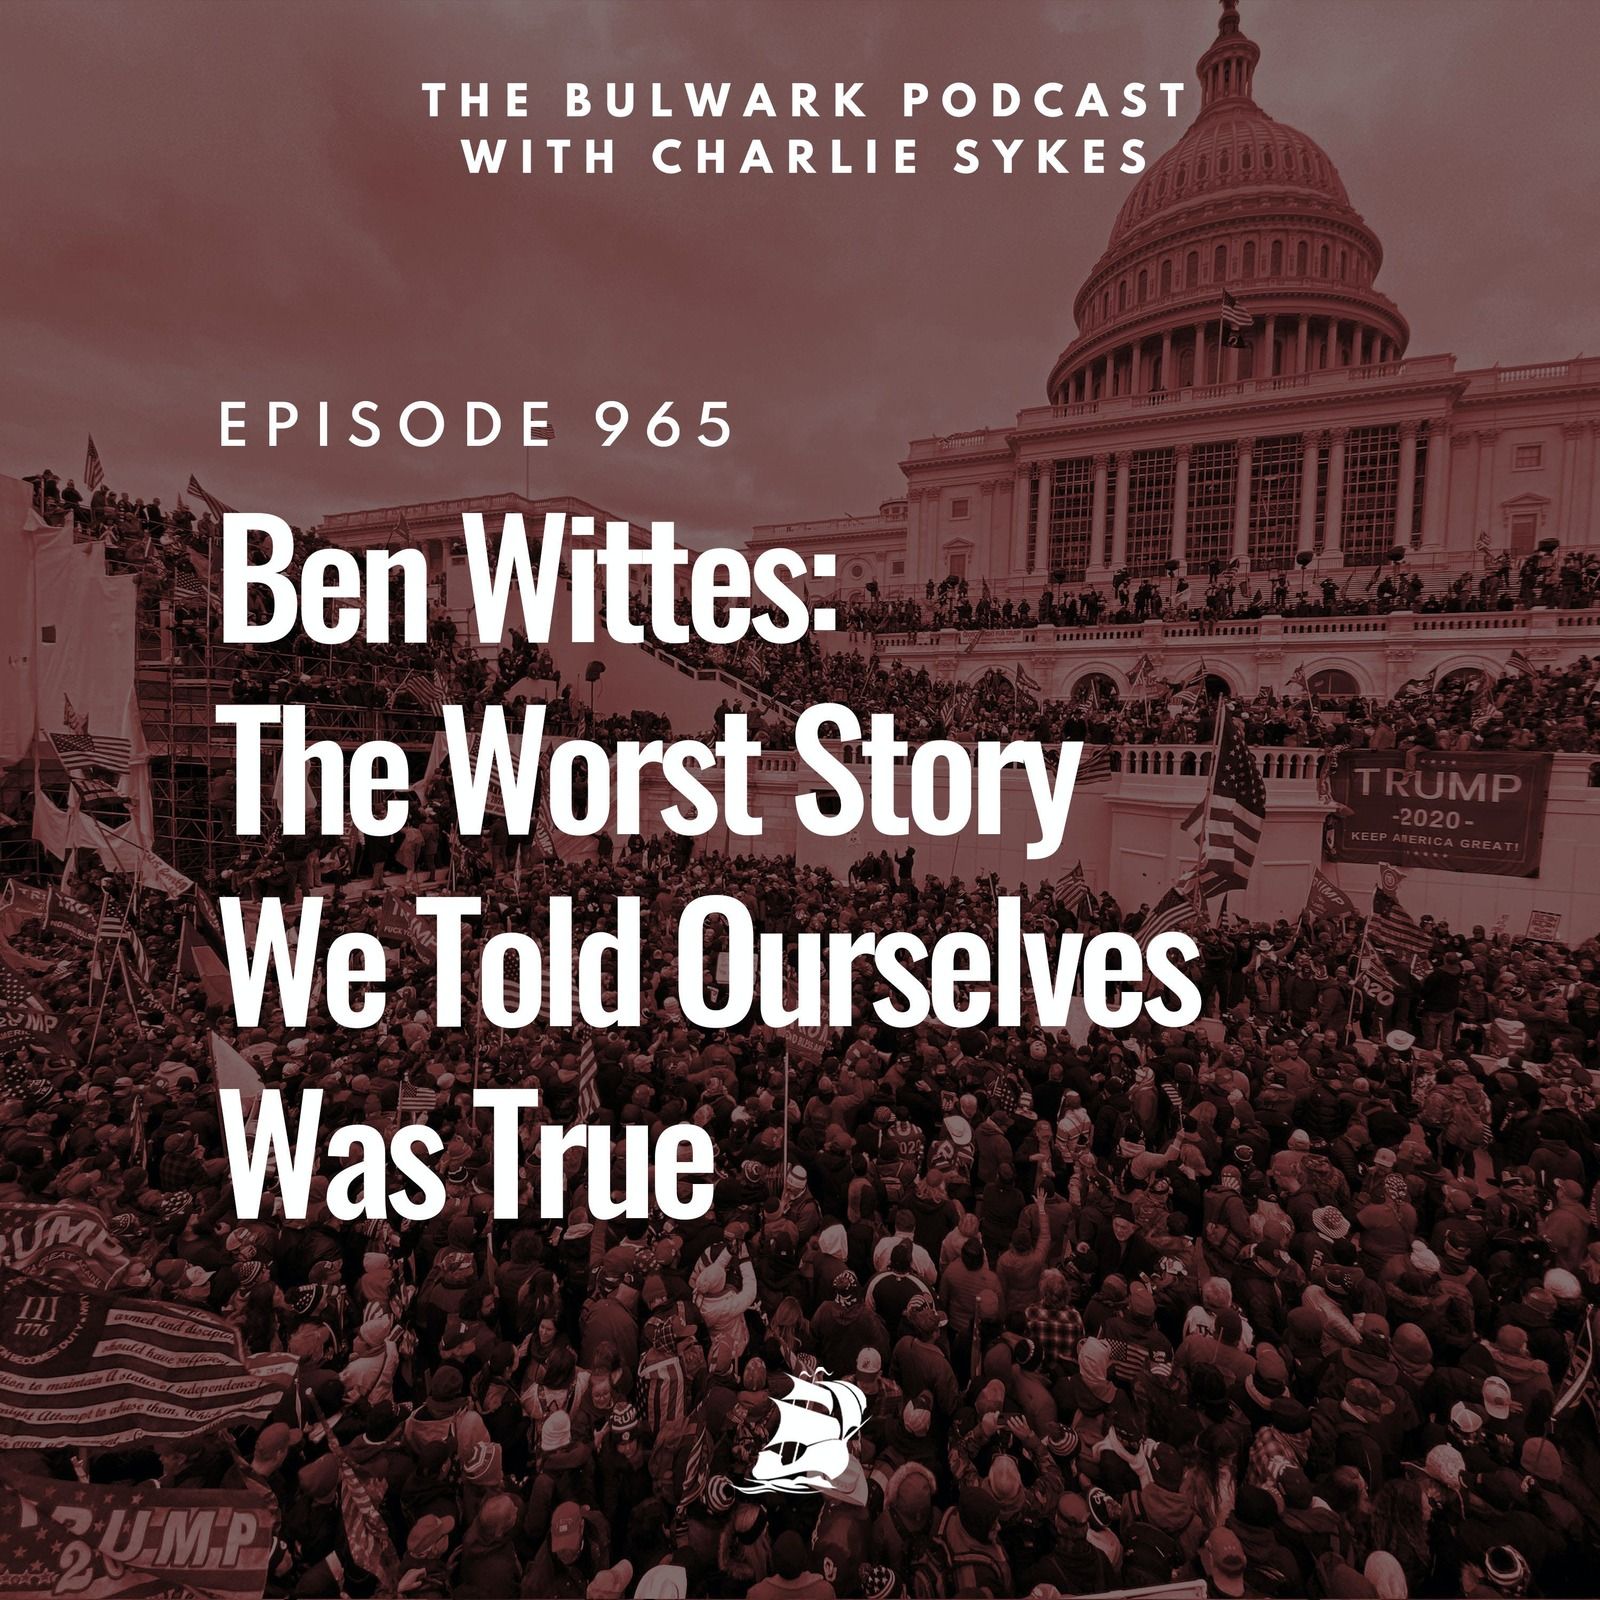 Ben Wittes: The Worst Story We Told Ourselves Was True by The Bulwark Podcast